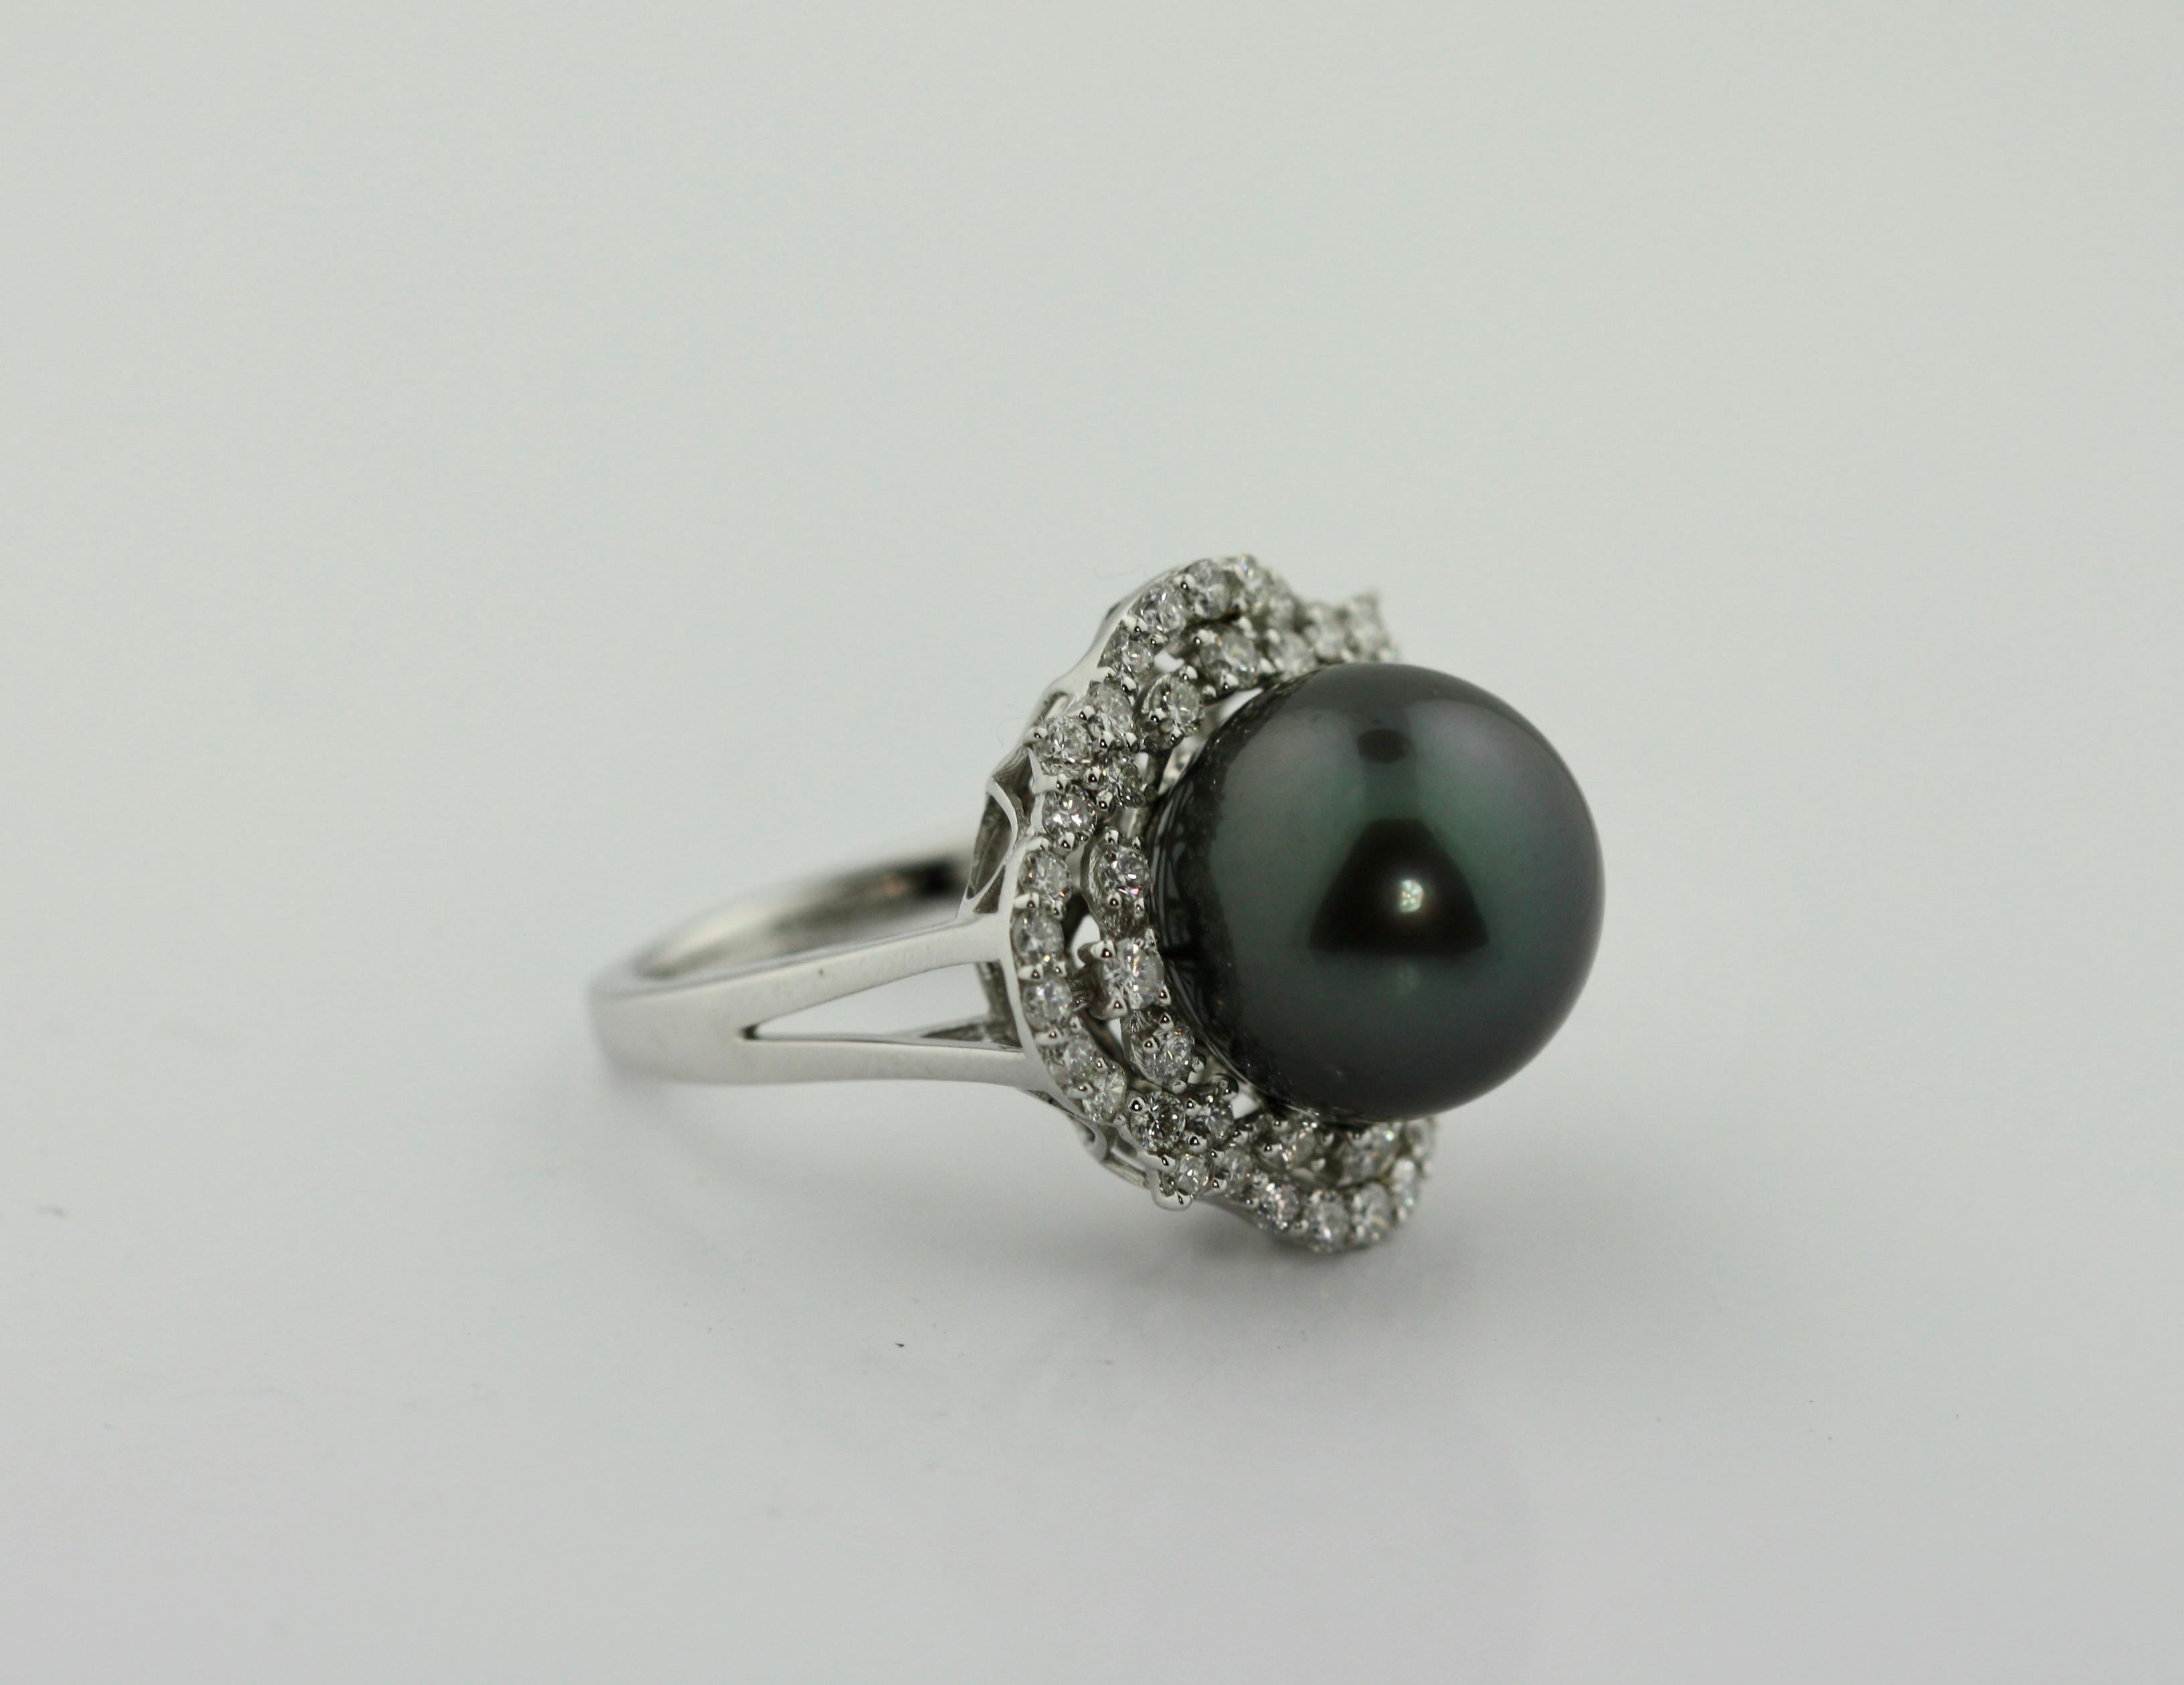 
Tahitian Pearl and Diamond Ring 
13mm Tahitian Pearl, Diamonds weighing approx. 1.07 carats
size 7
accompanied A I G appraisal 